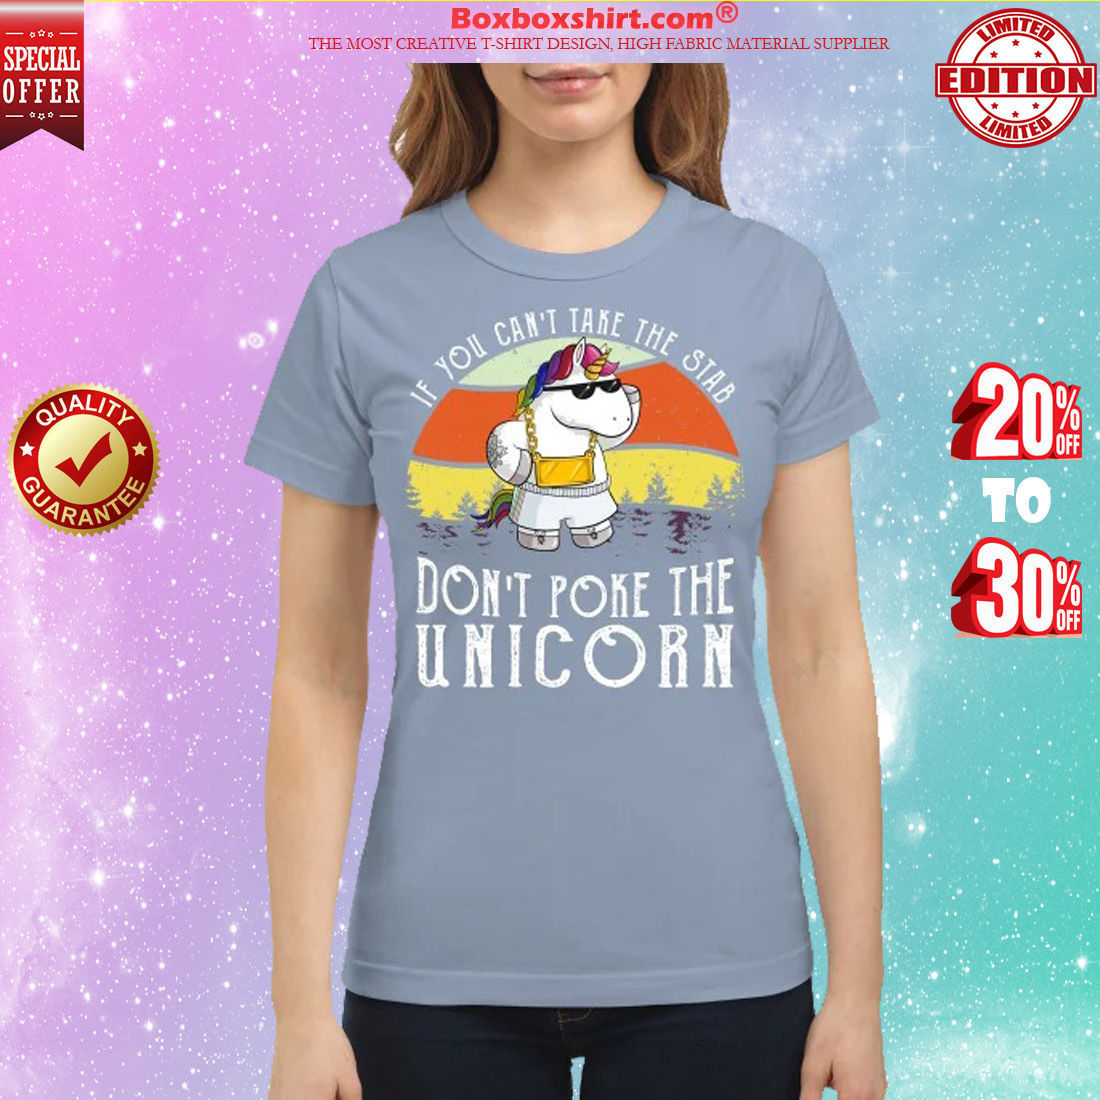 If you can't take the stab don't poke the unicorn classic shirt